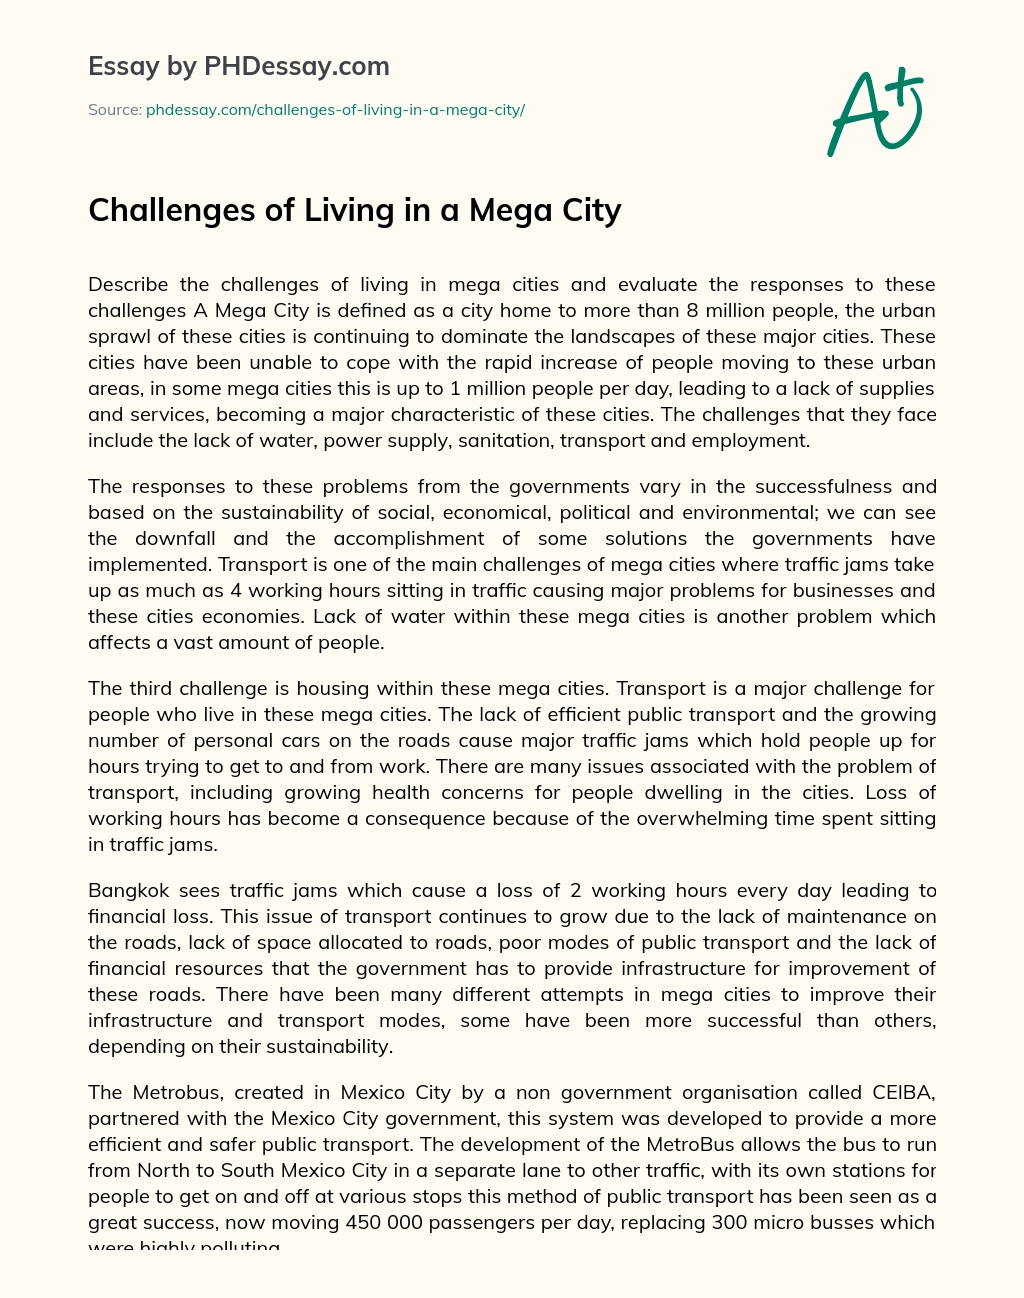 Challenges of Living in a Mega City essay